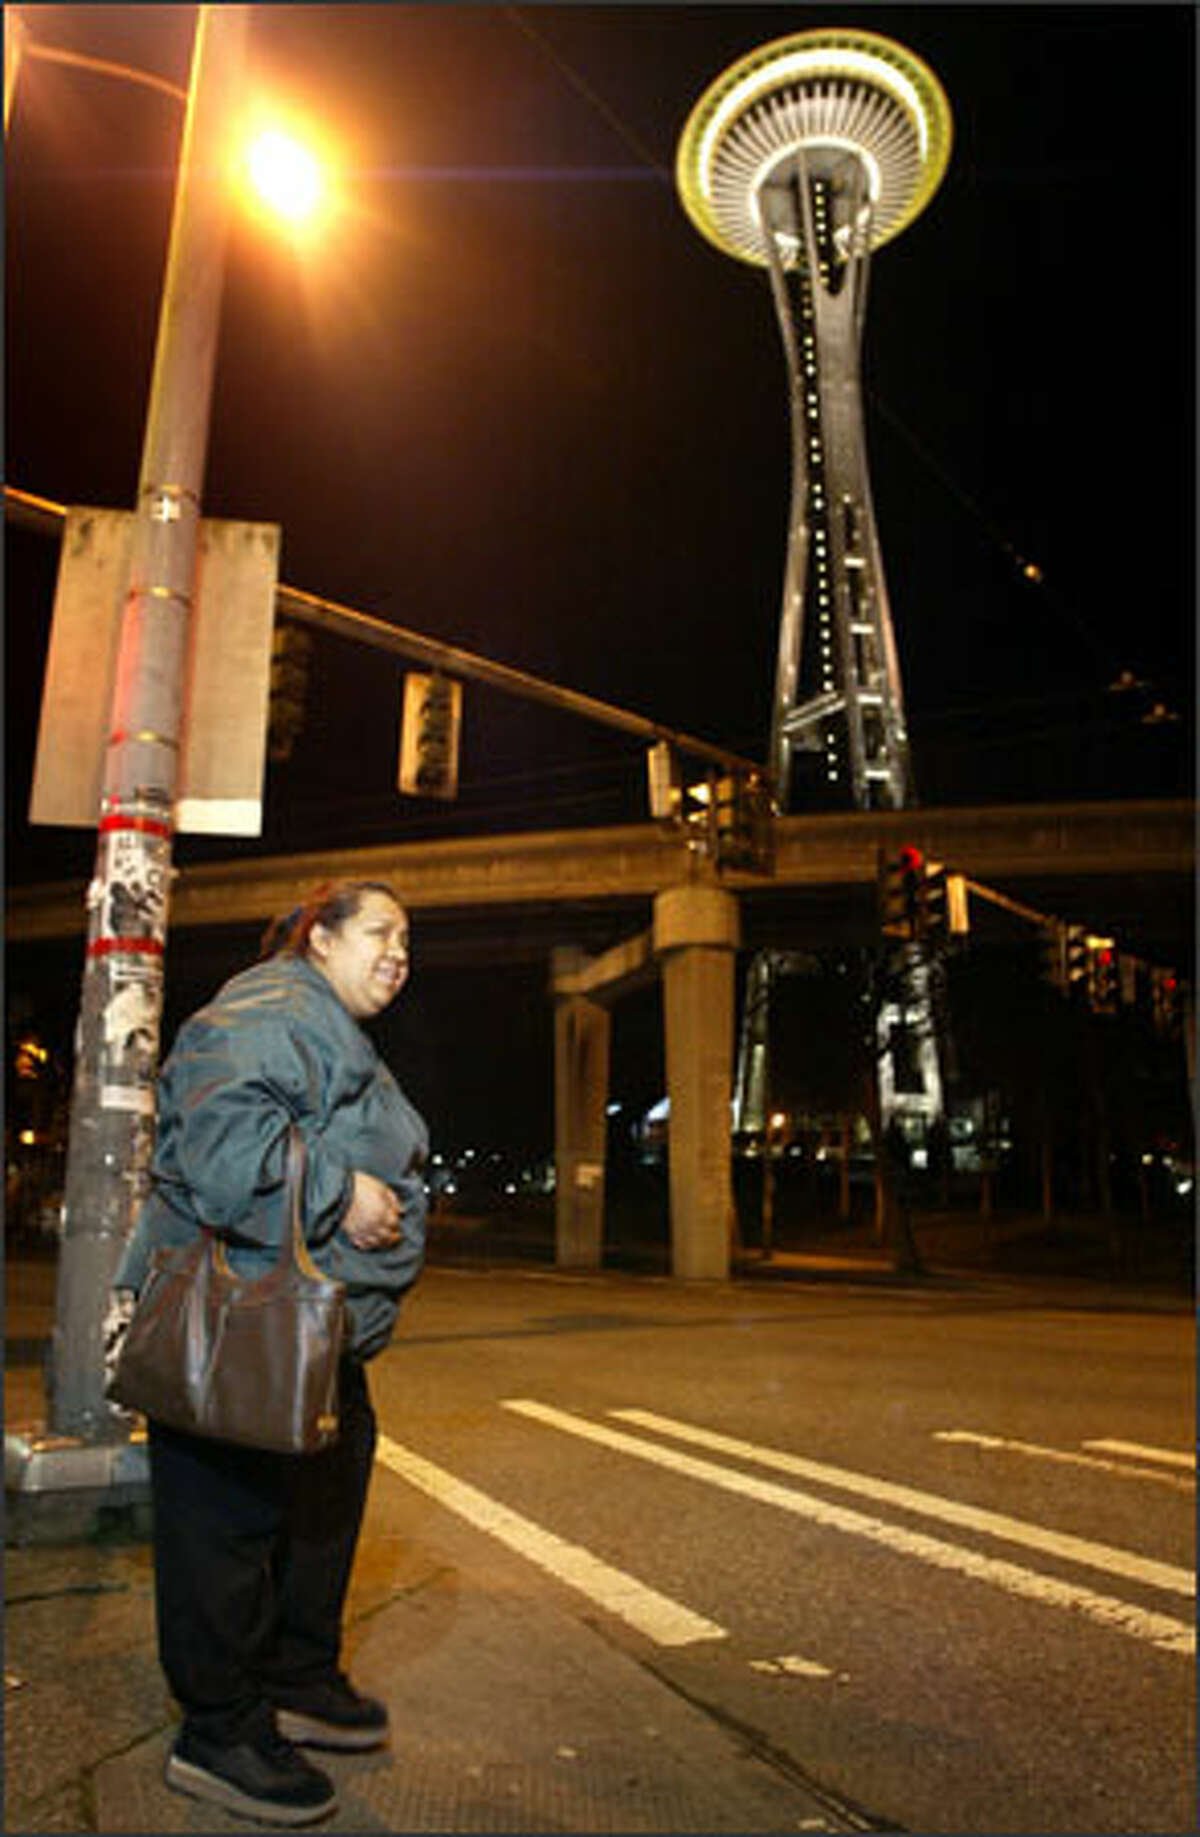 Narciza Pineda, 42, prepares to cross Broad Street on her way to her job as a janitor at the Space Needle, where she earns $10.75 an hour -- more than minimum wage, but barely enough for her family to live on.